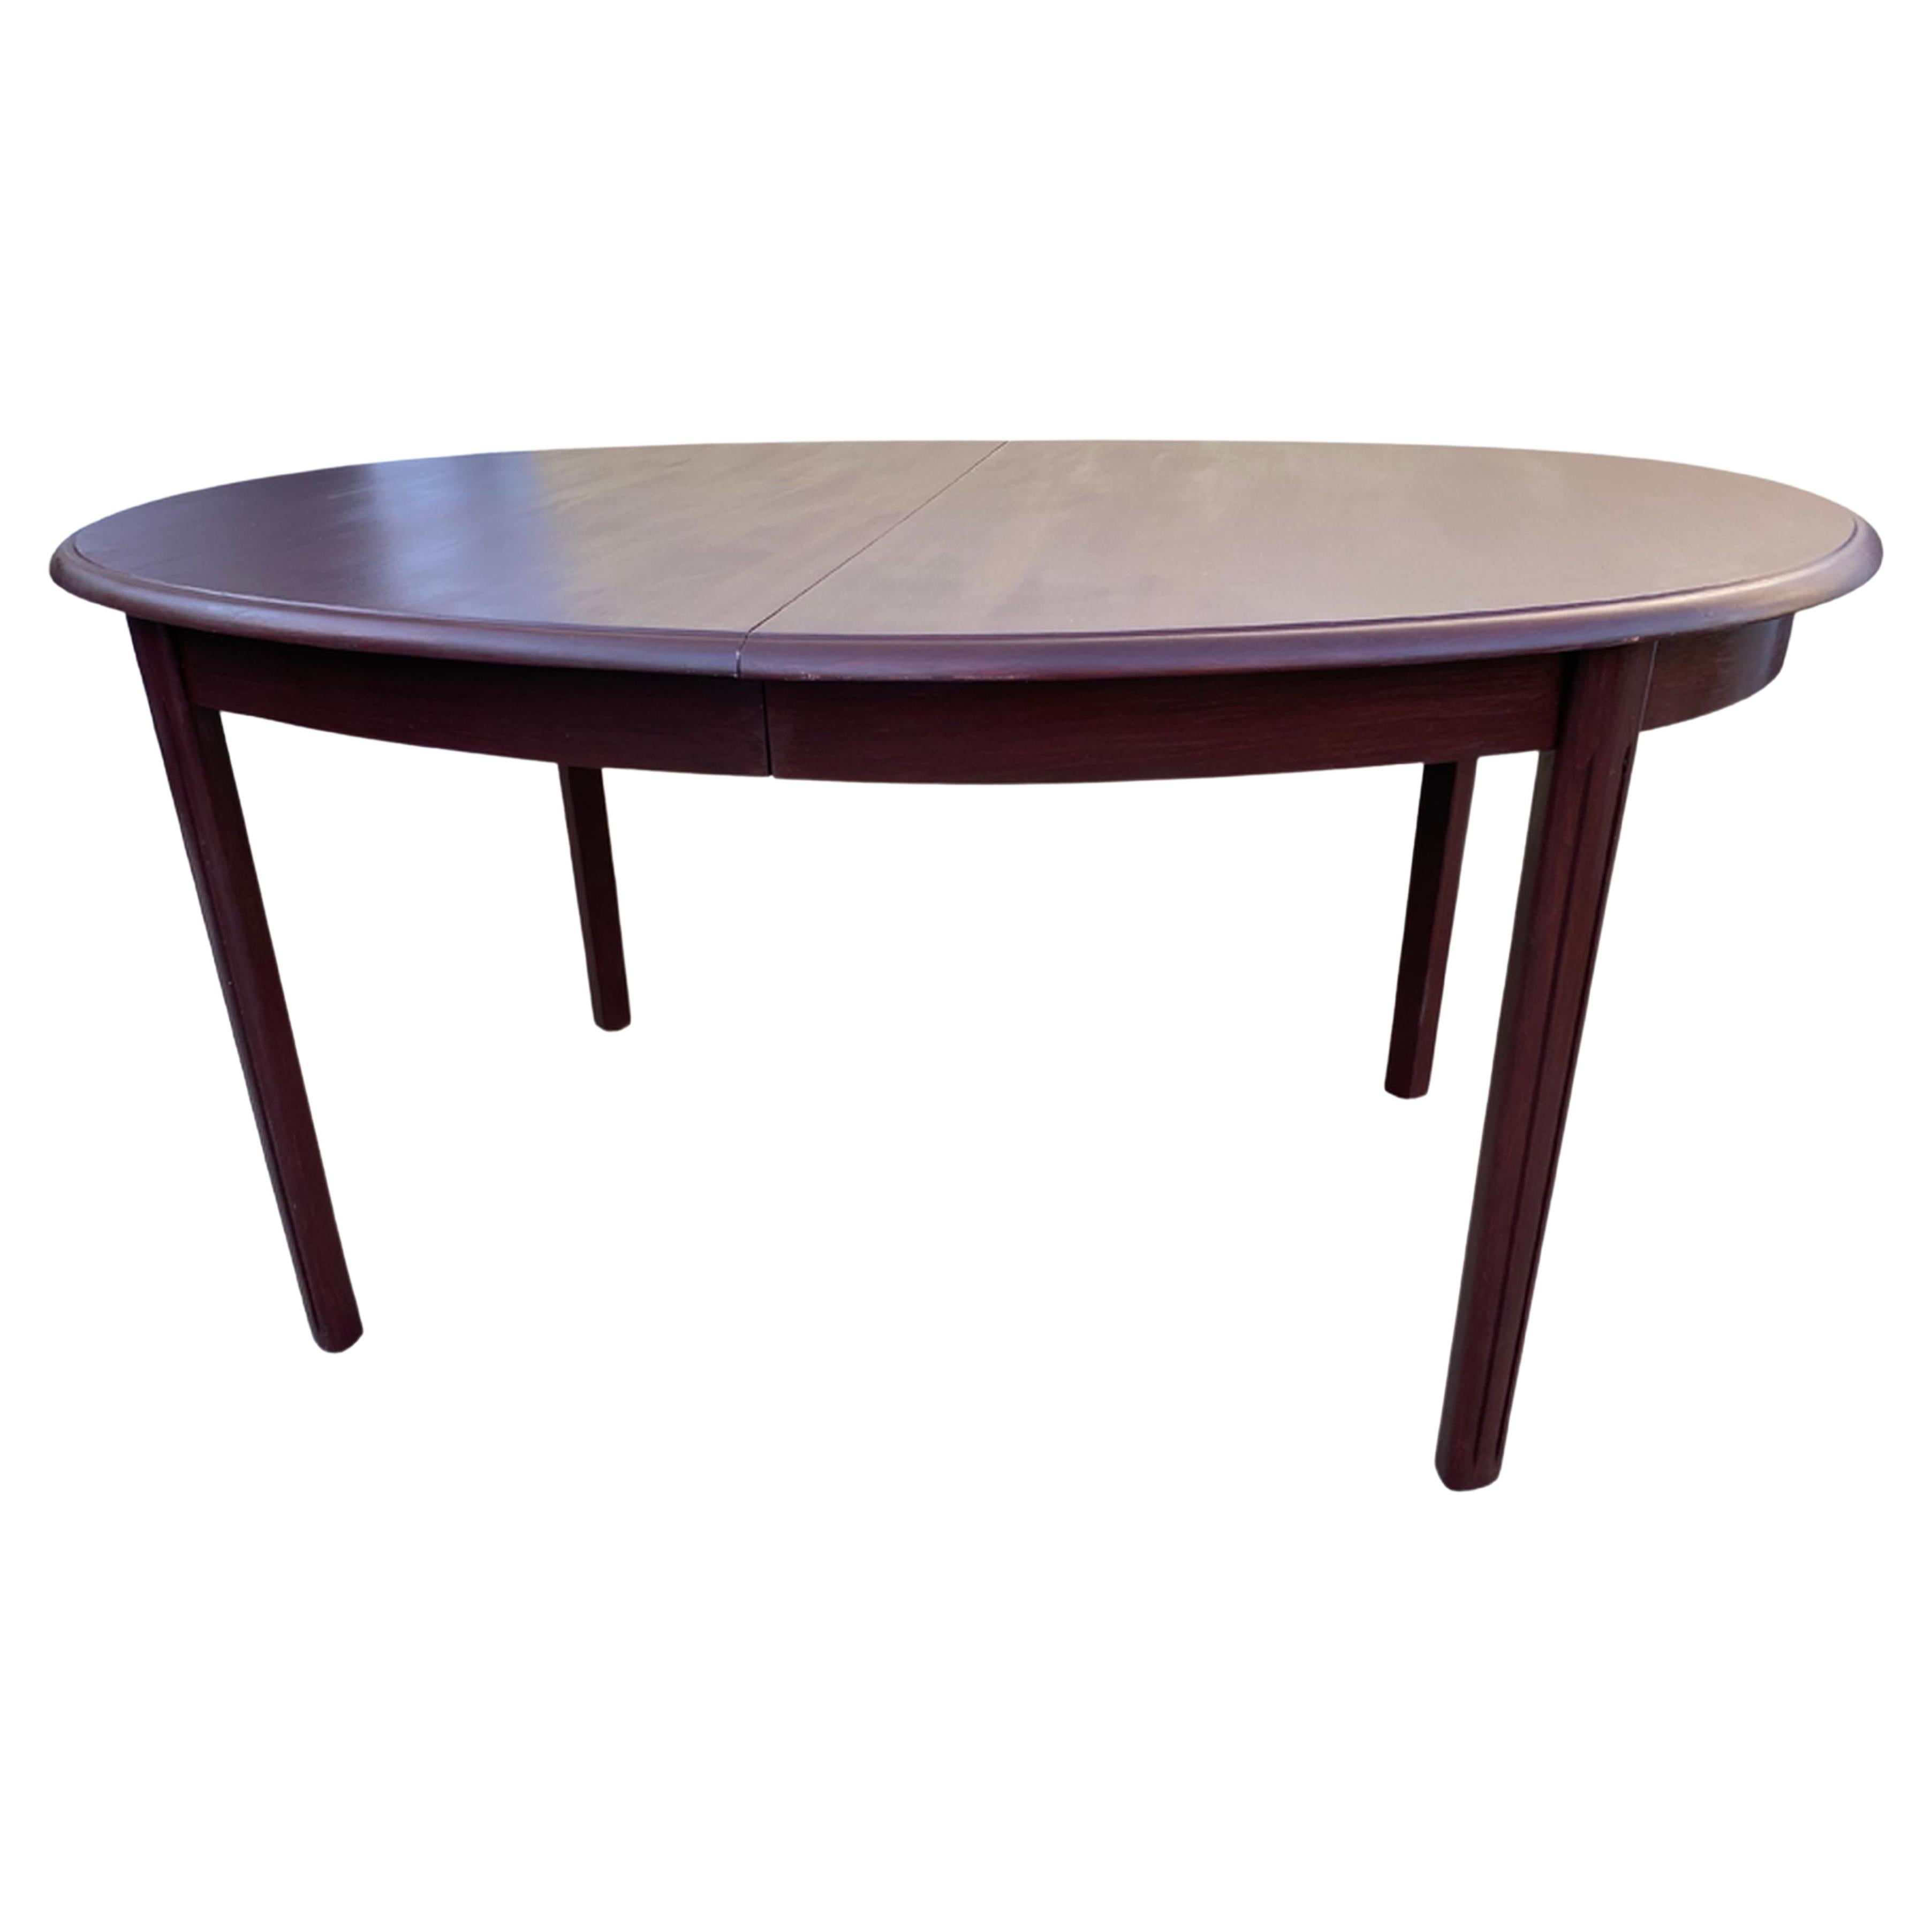 Danish Midcentury Dining Table in Mahogany with Two Extra Leafs For Sale